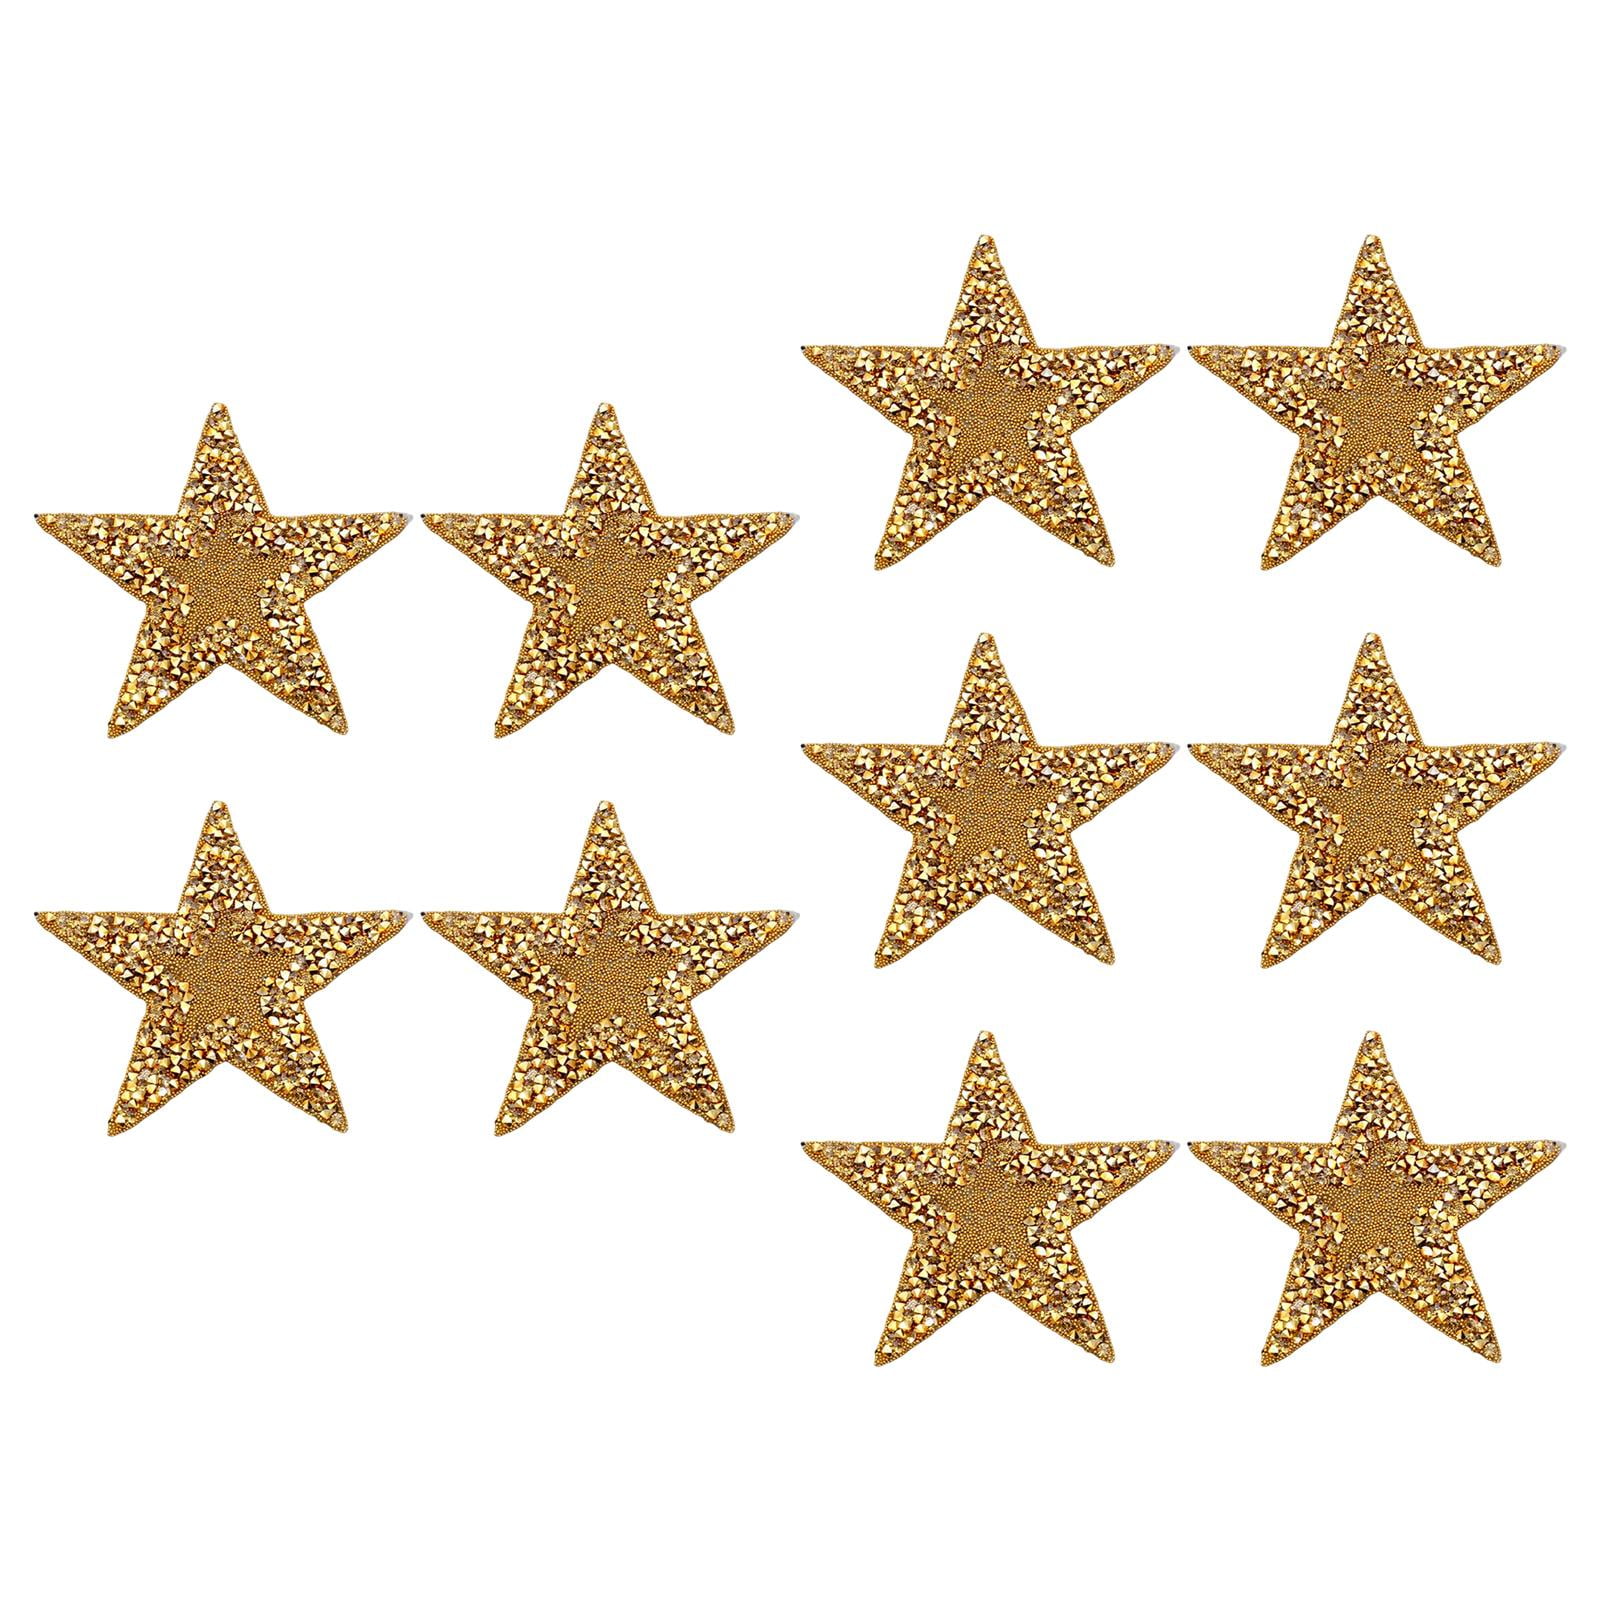 1pc Self-adhesive Rhinestone Star Patches for Clothing Iron on Clothes  Backpacks Jeans Jacket Small Badges Stripes Sticker DIY